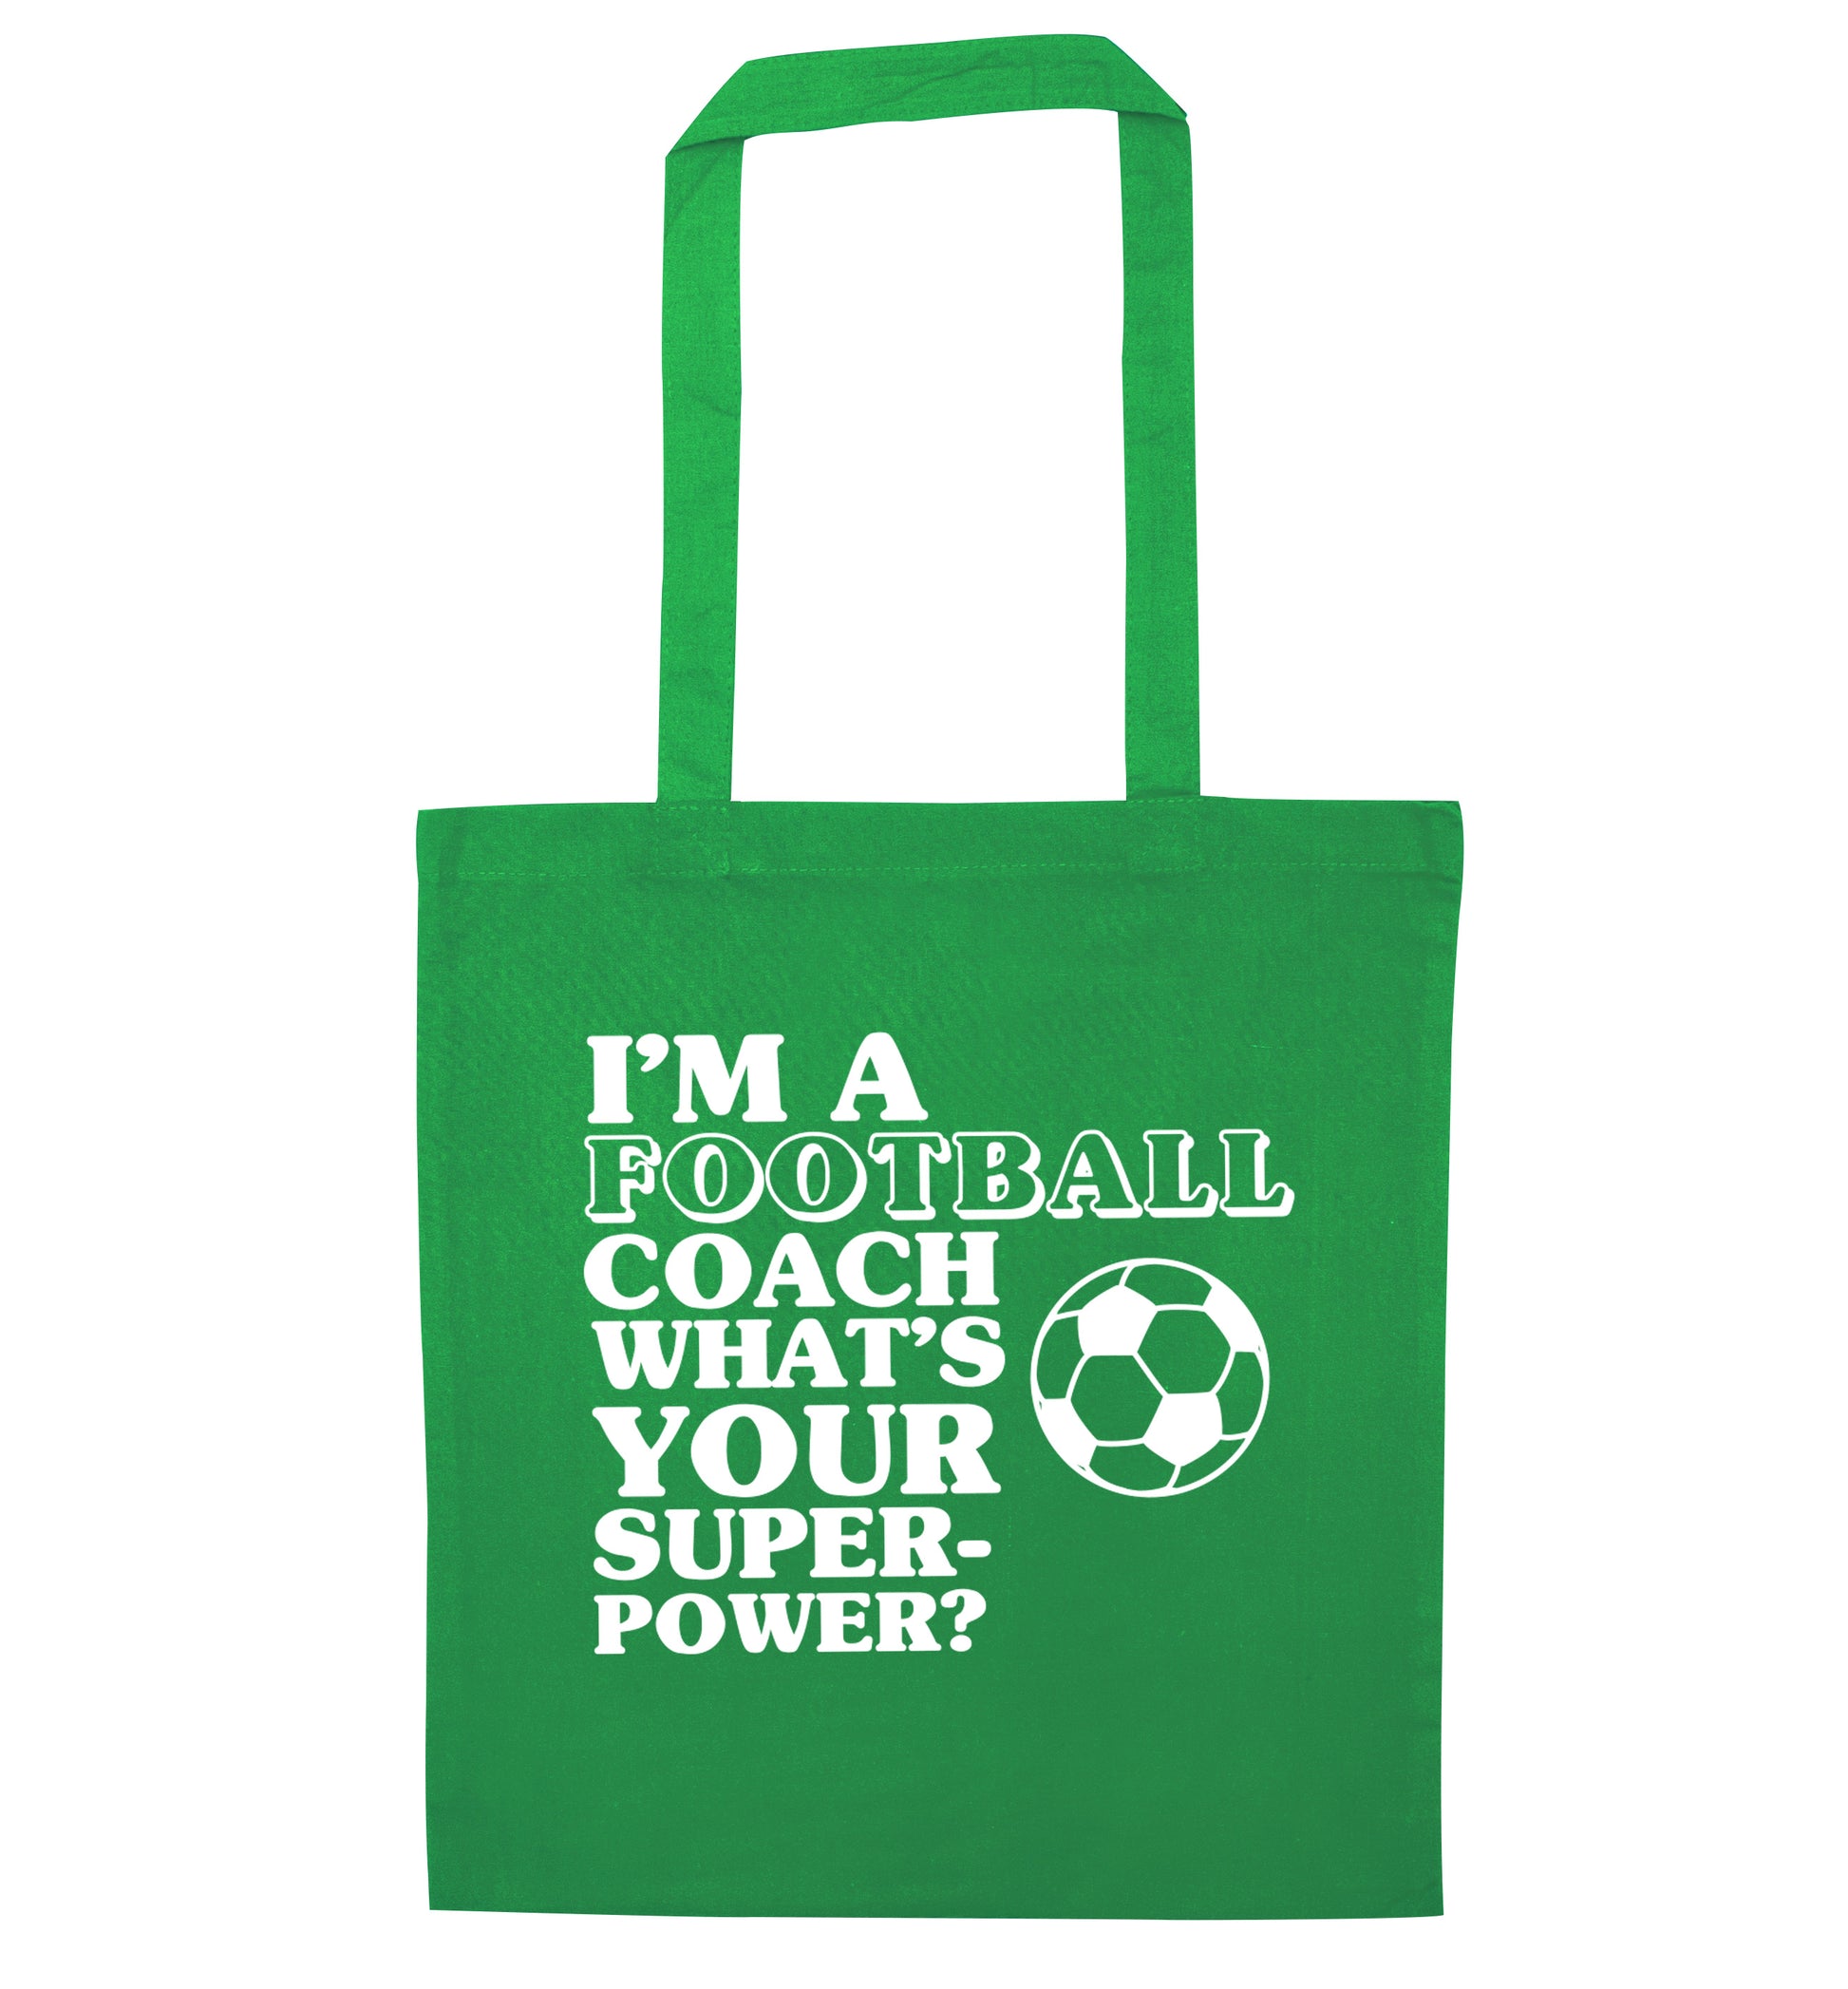 I'm a football coach what's your superpower? green tote bag